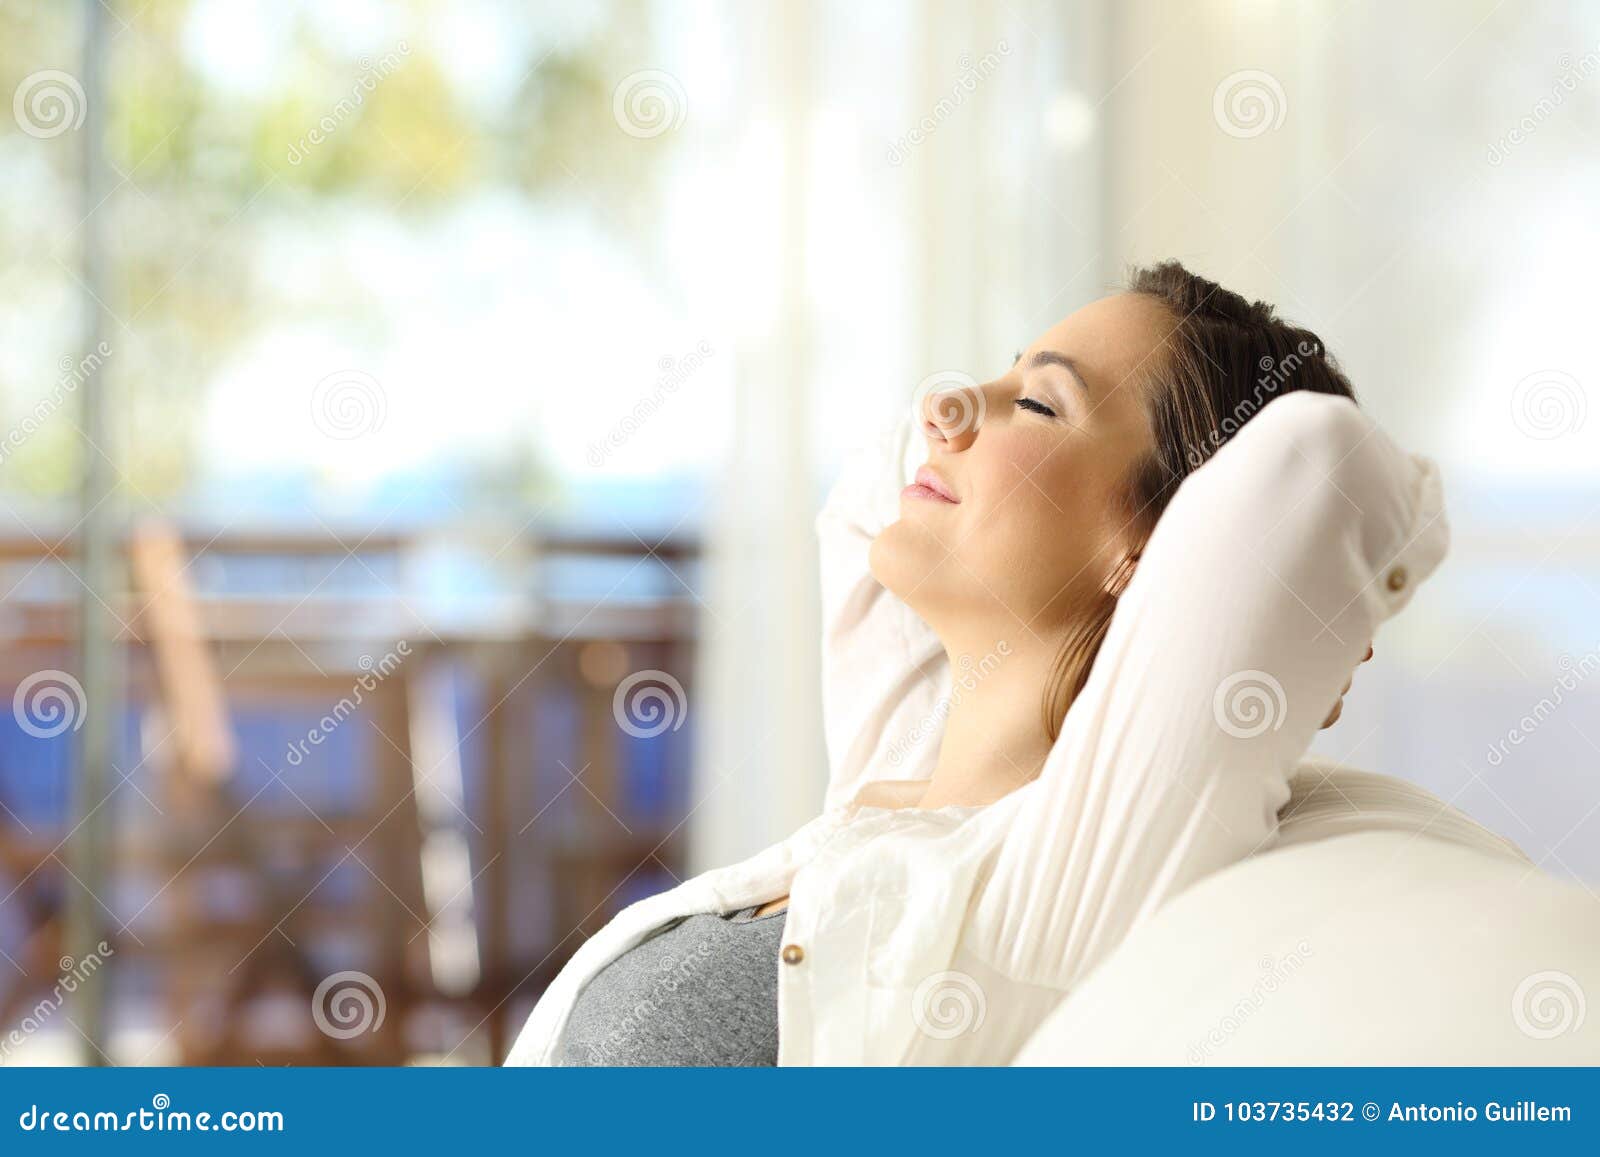 woman relaxing on vacations in an apartment